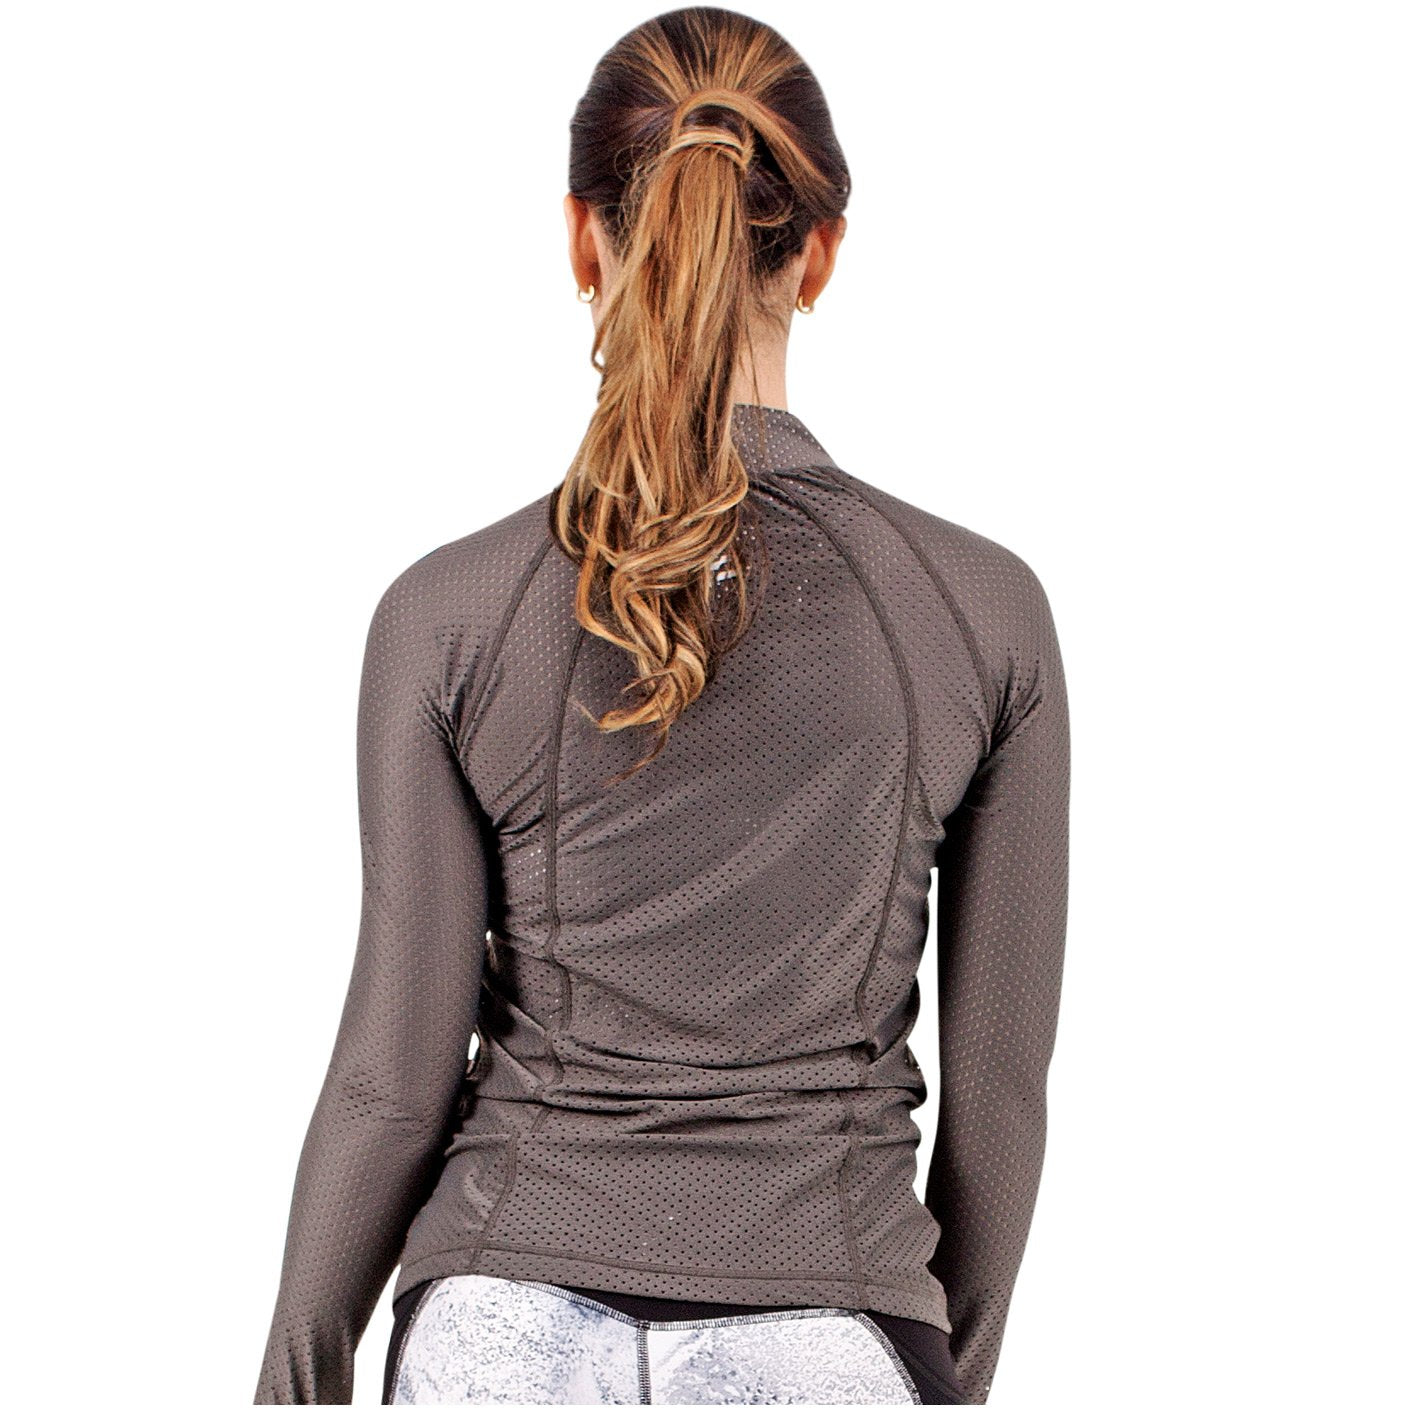 FLEXMEE Activewear: 934000 - Marble See-Through Shirt For Women